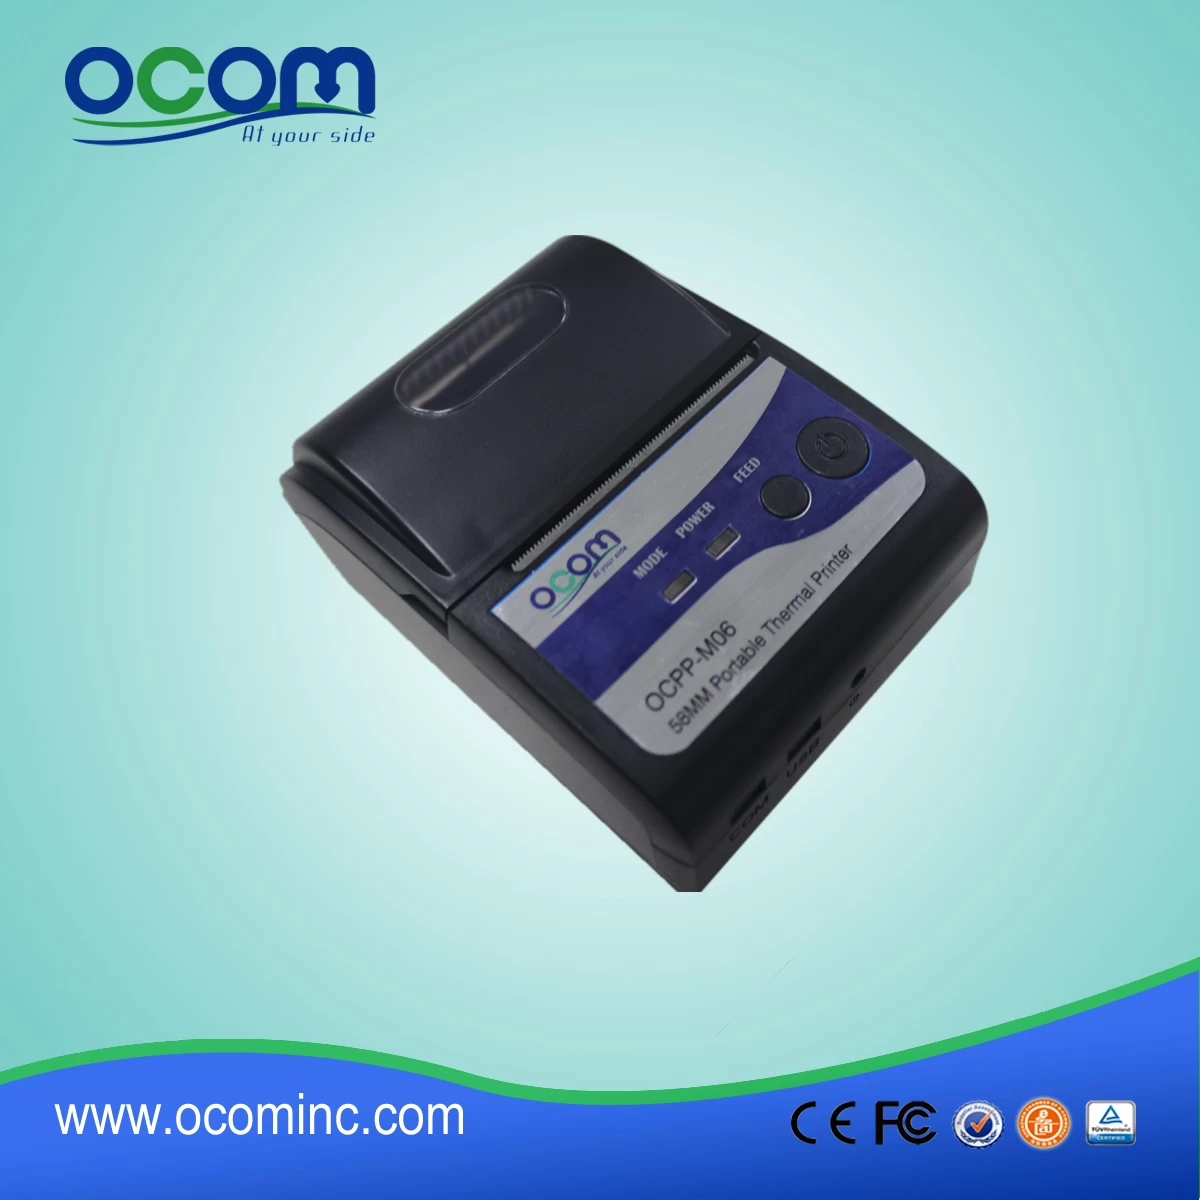 OCPP-M06 USB Powered Mini Taxi Receipt Thermal Printer for Android